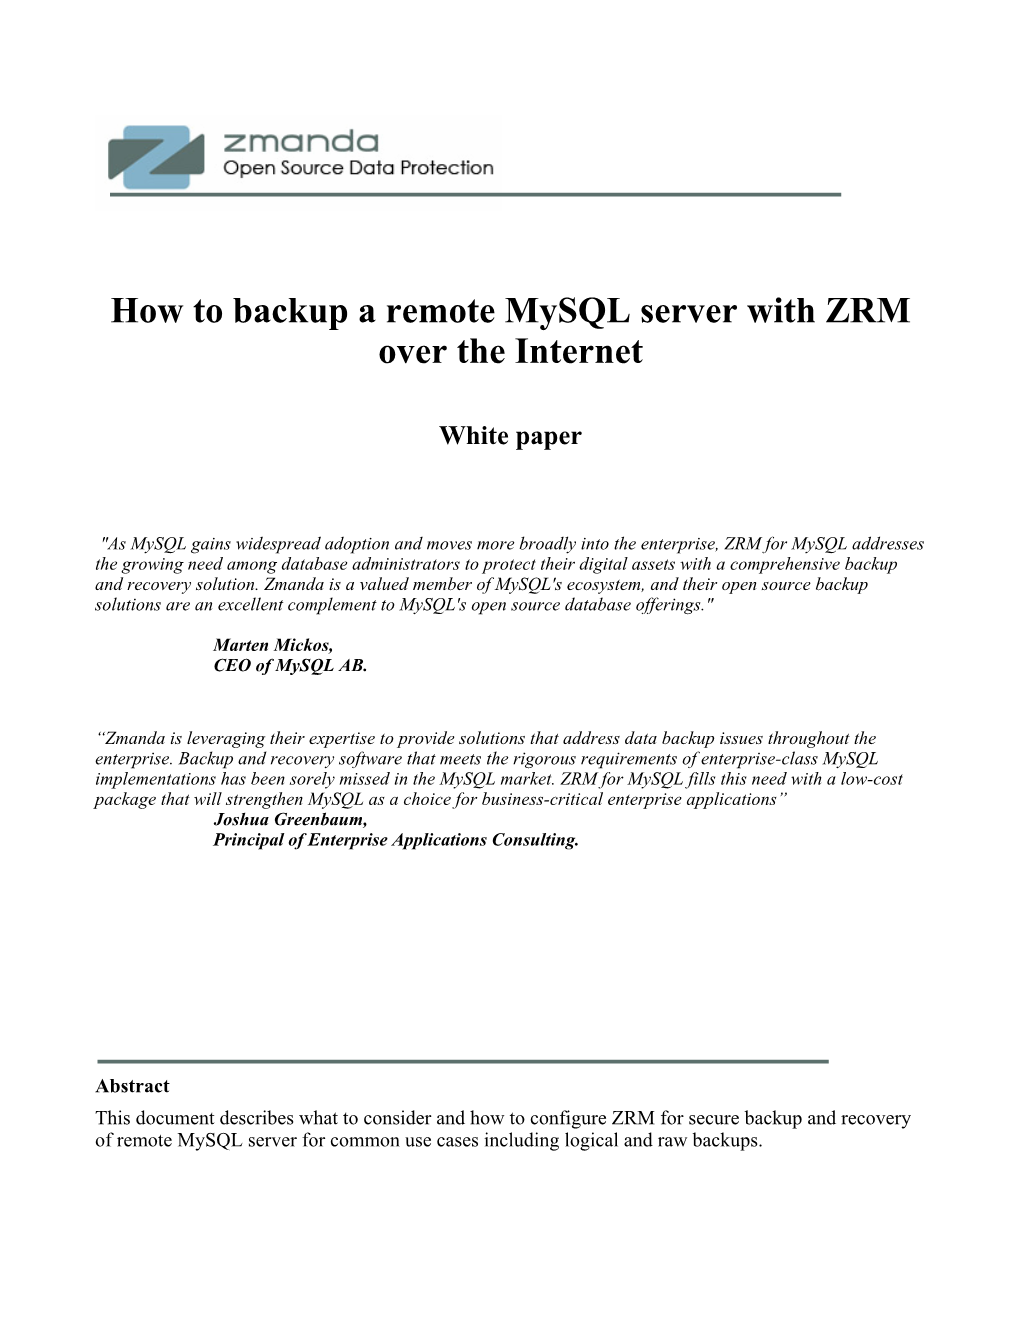 How to Backup a Remote Mysql Server with ZRM Over the Internet